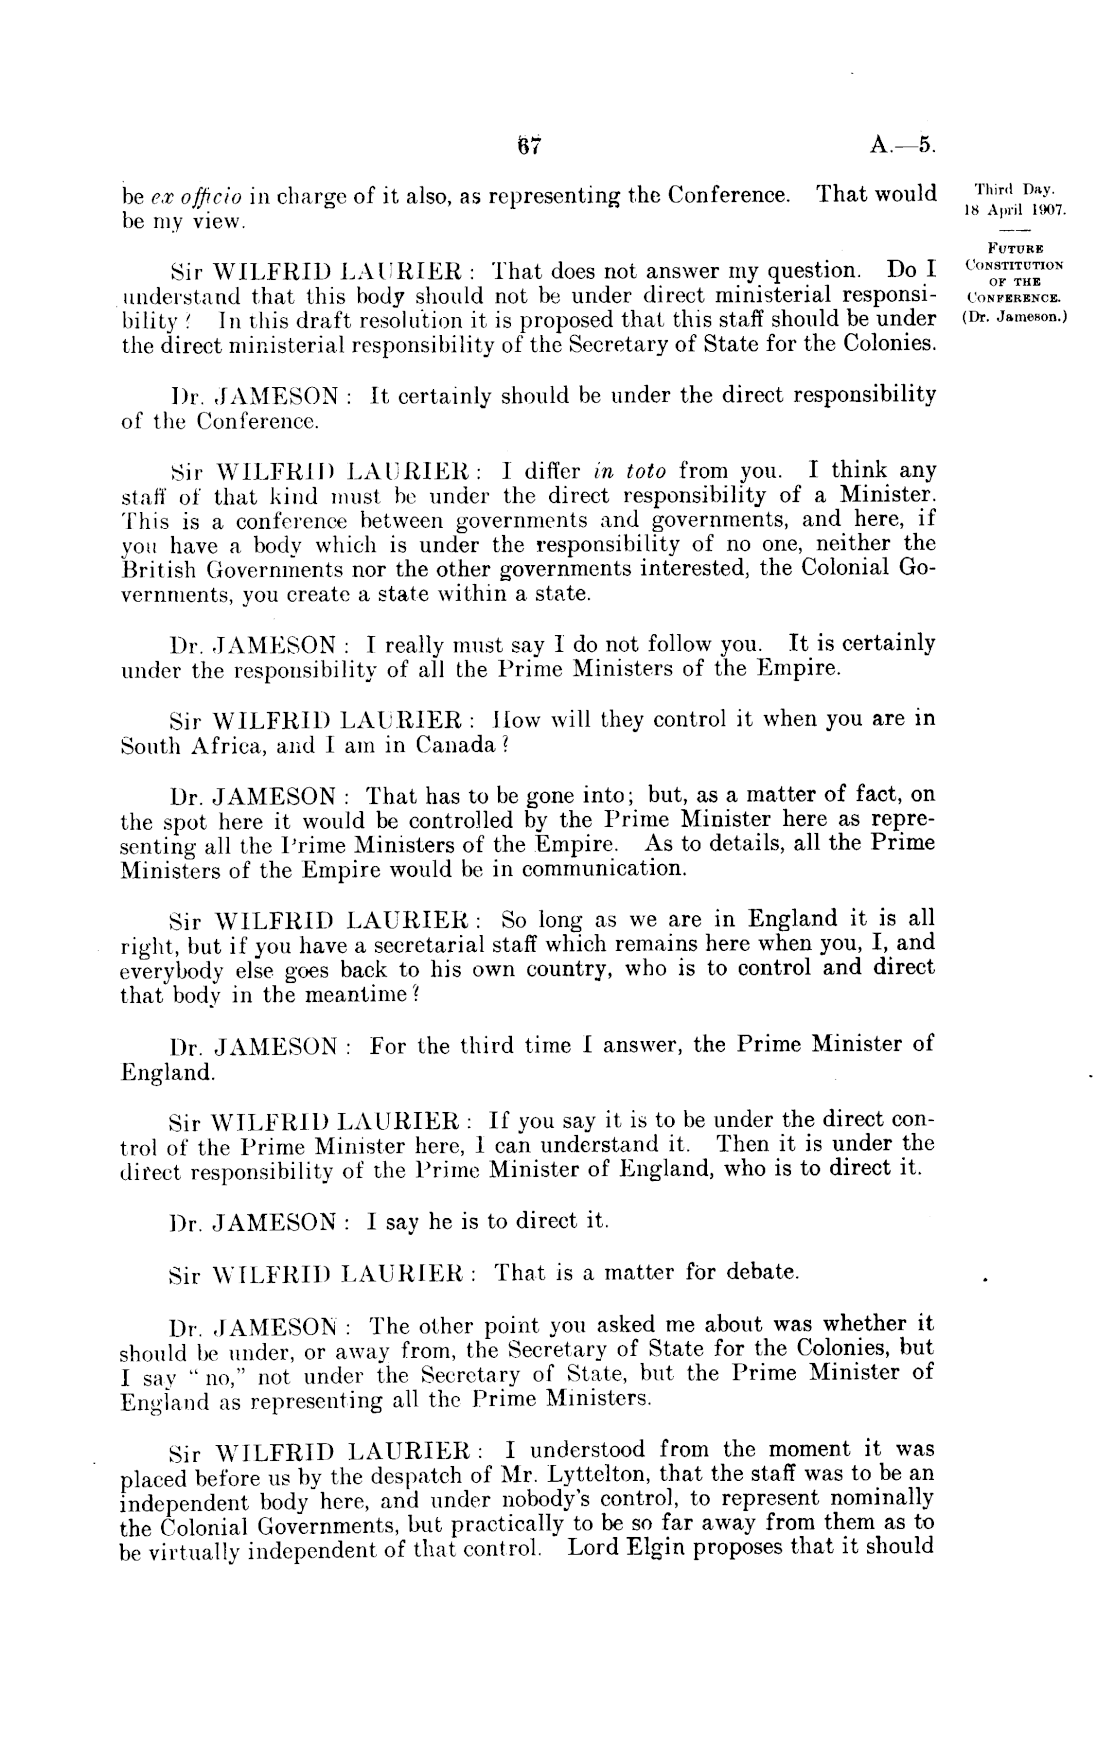 Papers Past Parliamentary Papers Appendix To The Journals Of The House Of Representatives 1907 Session I Page 67